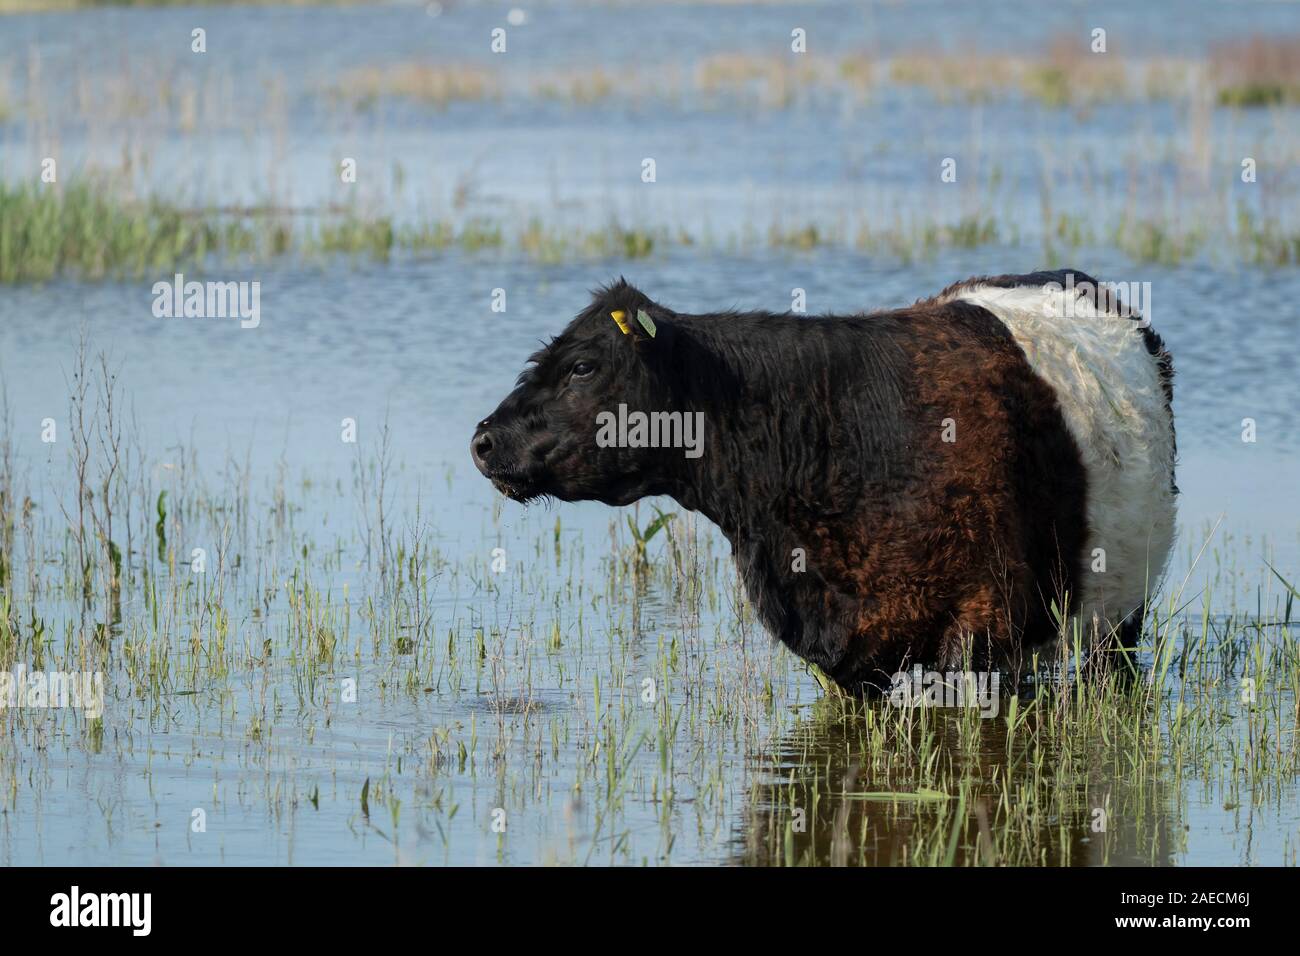 Cow (Bos taurus) standing in a shallow lake, Lincolnshire, England, United Kingdom Stock Photo